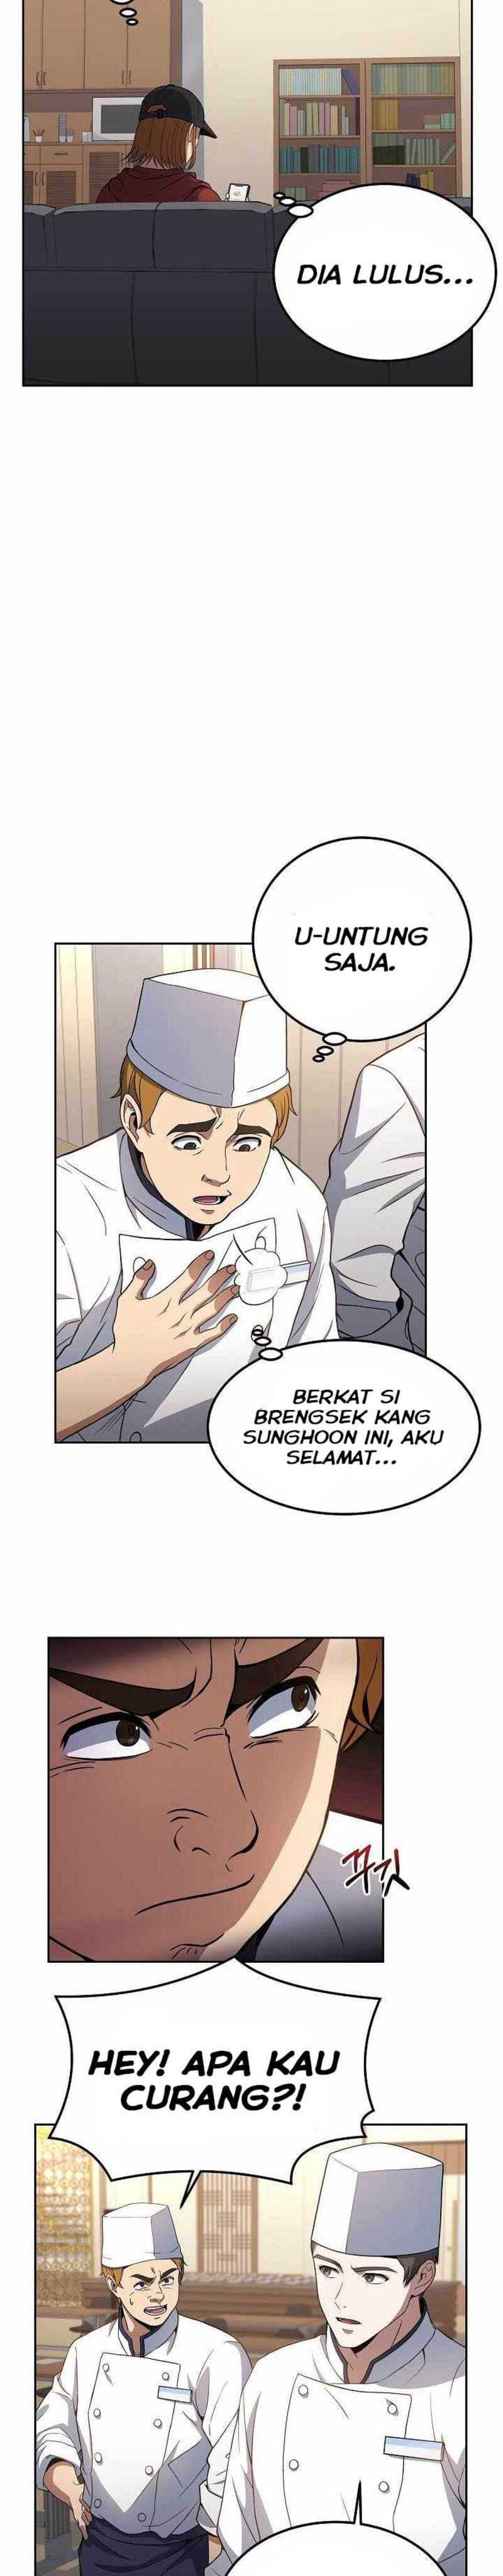 Youngest Chef From the 3rd Rate Hotel Chapter 09